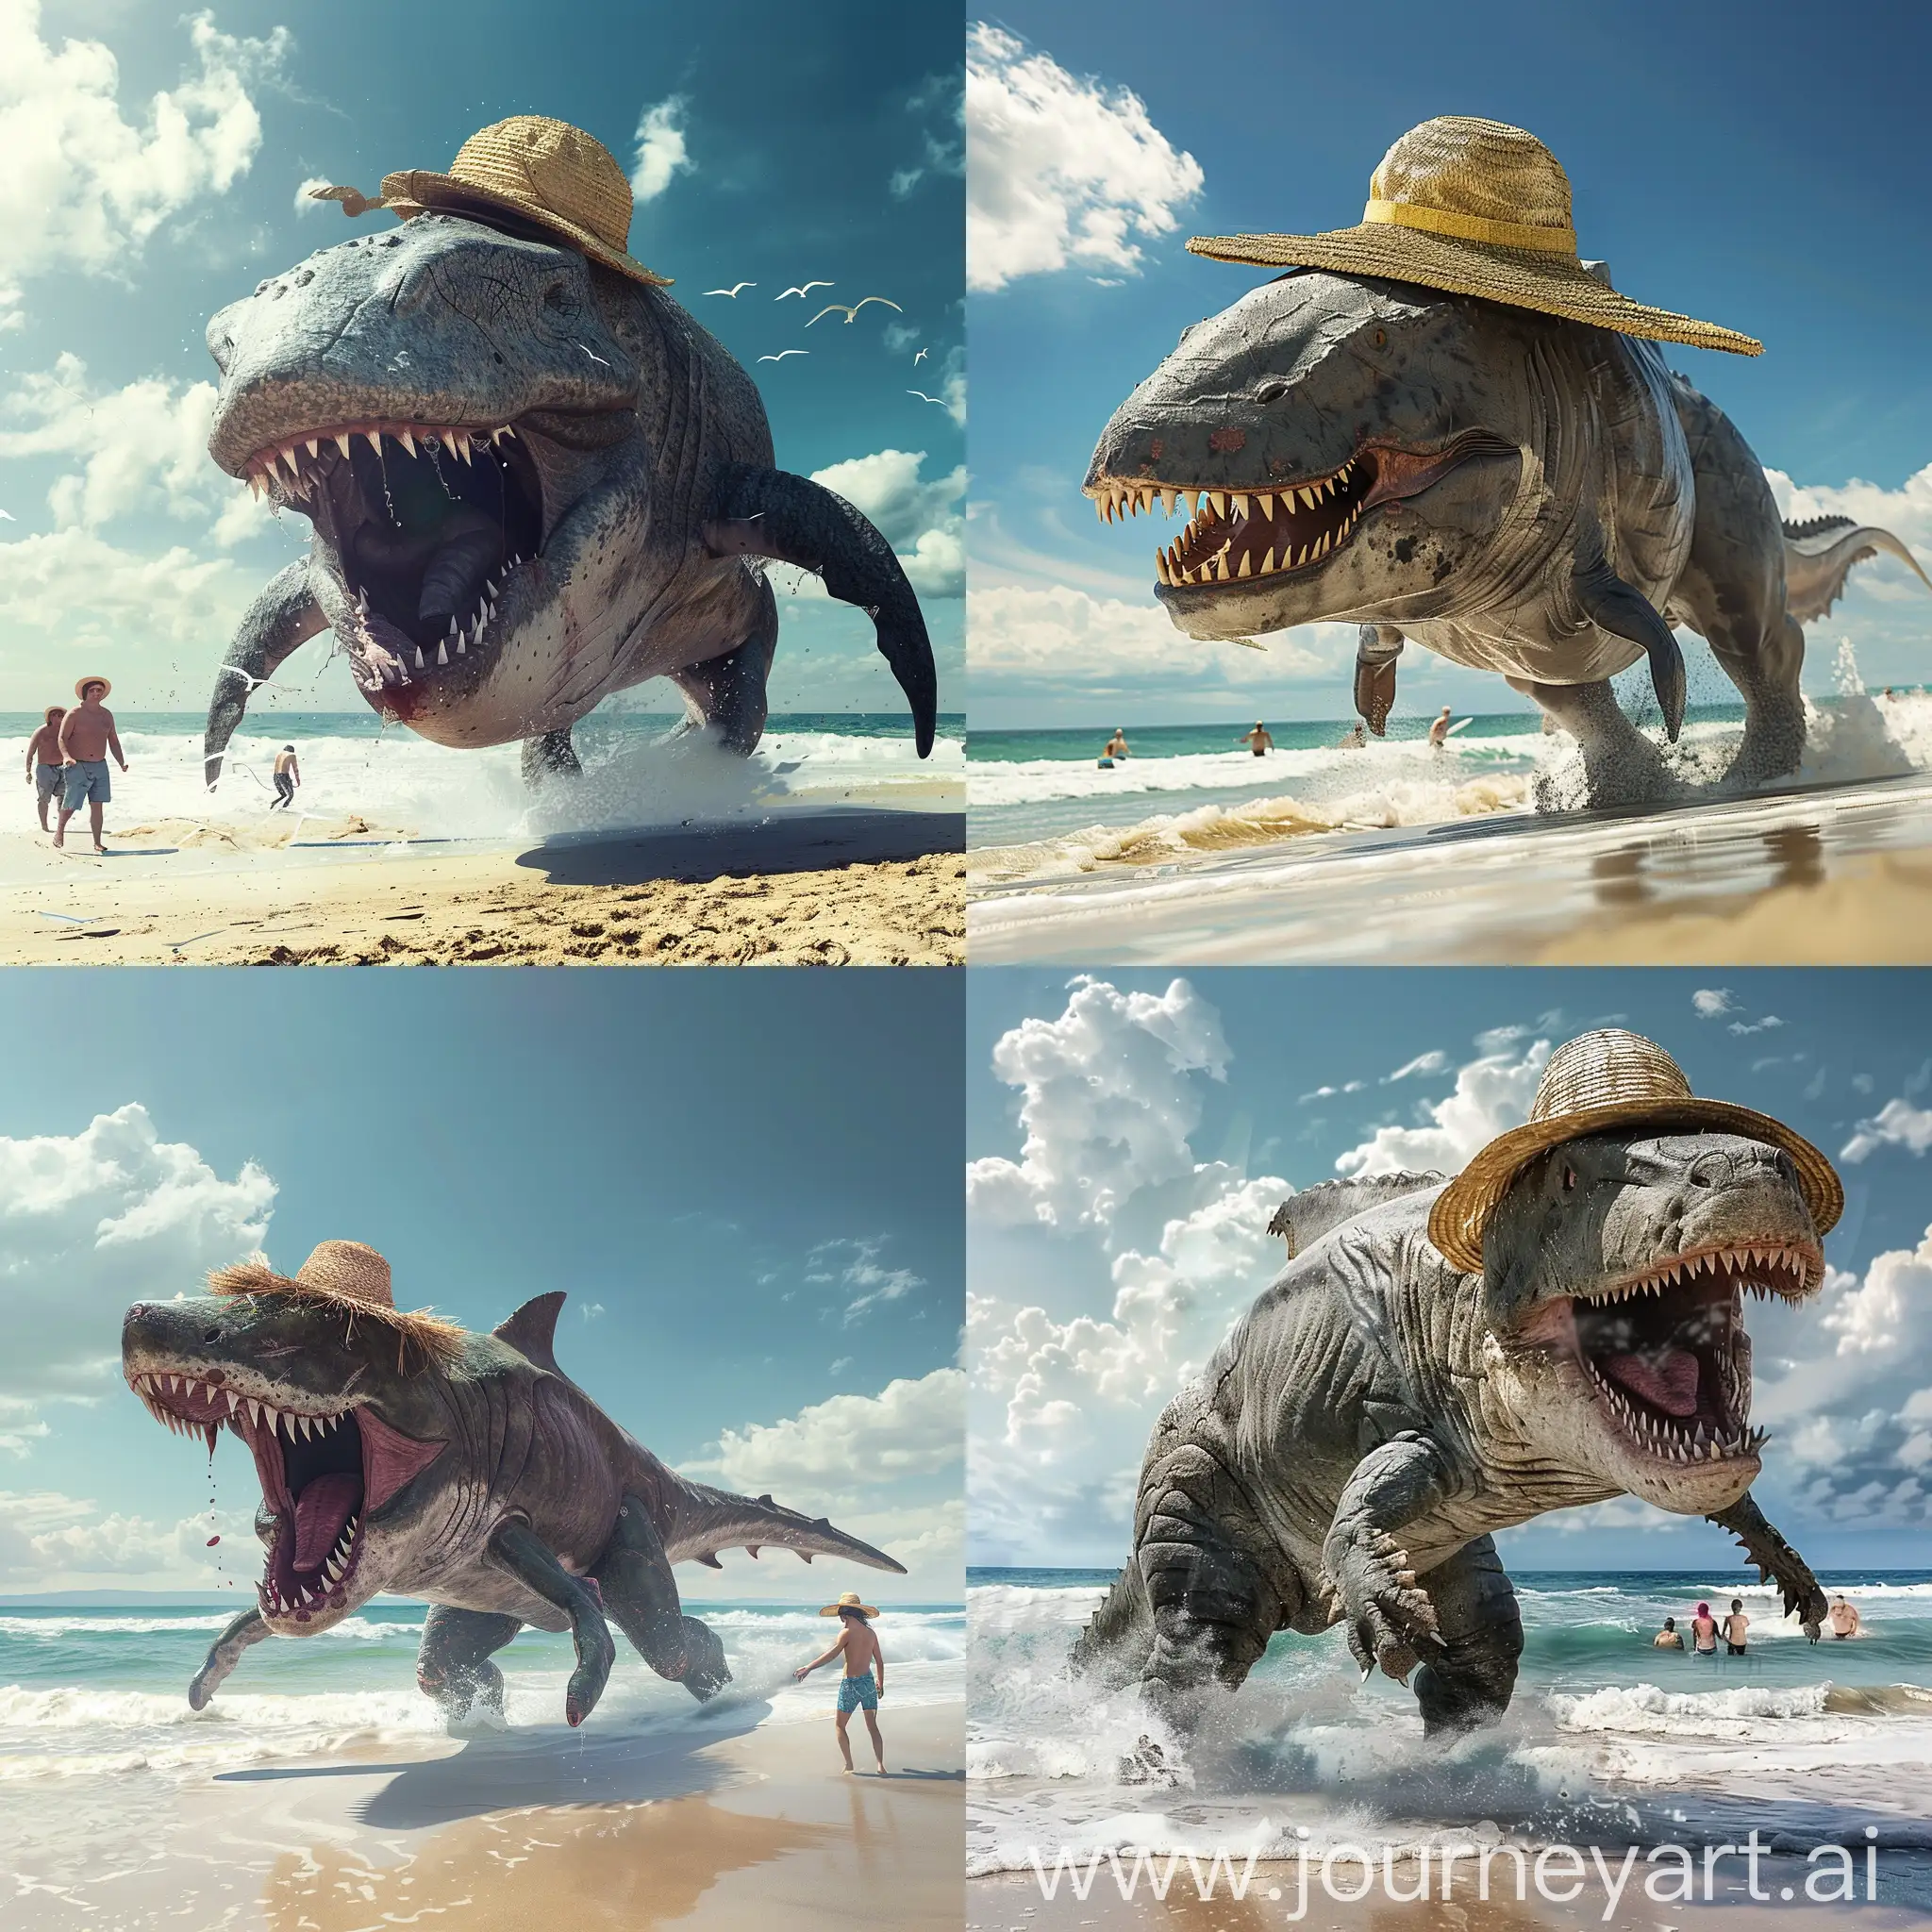 Walking megalodon wearing straw hat eating white people on the beach